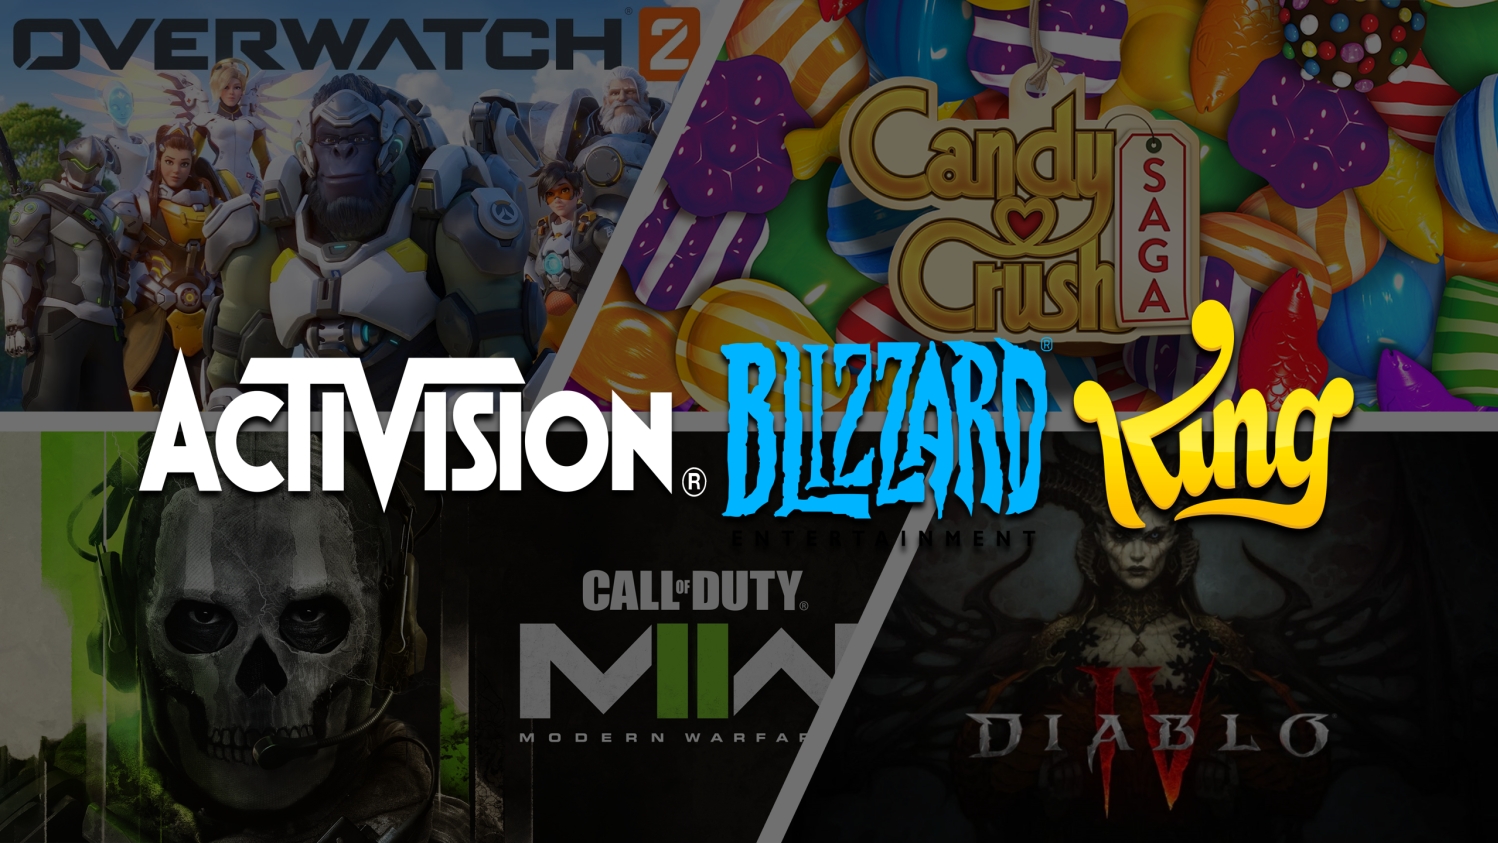 What do you think about Blizzard making more mobile games?